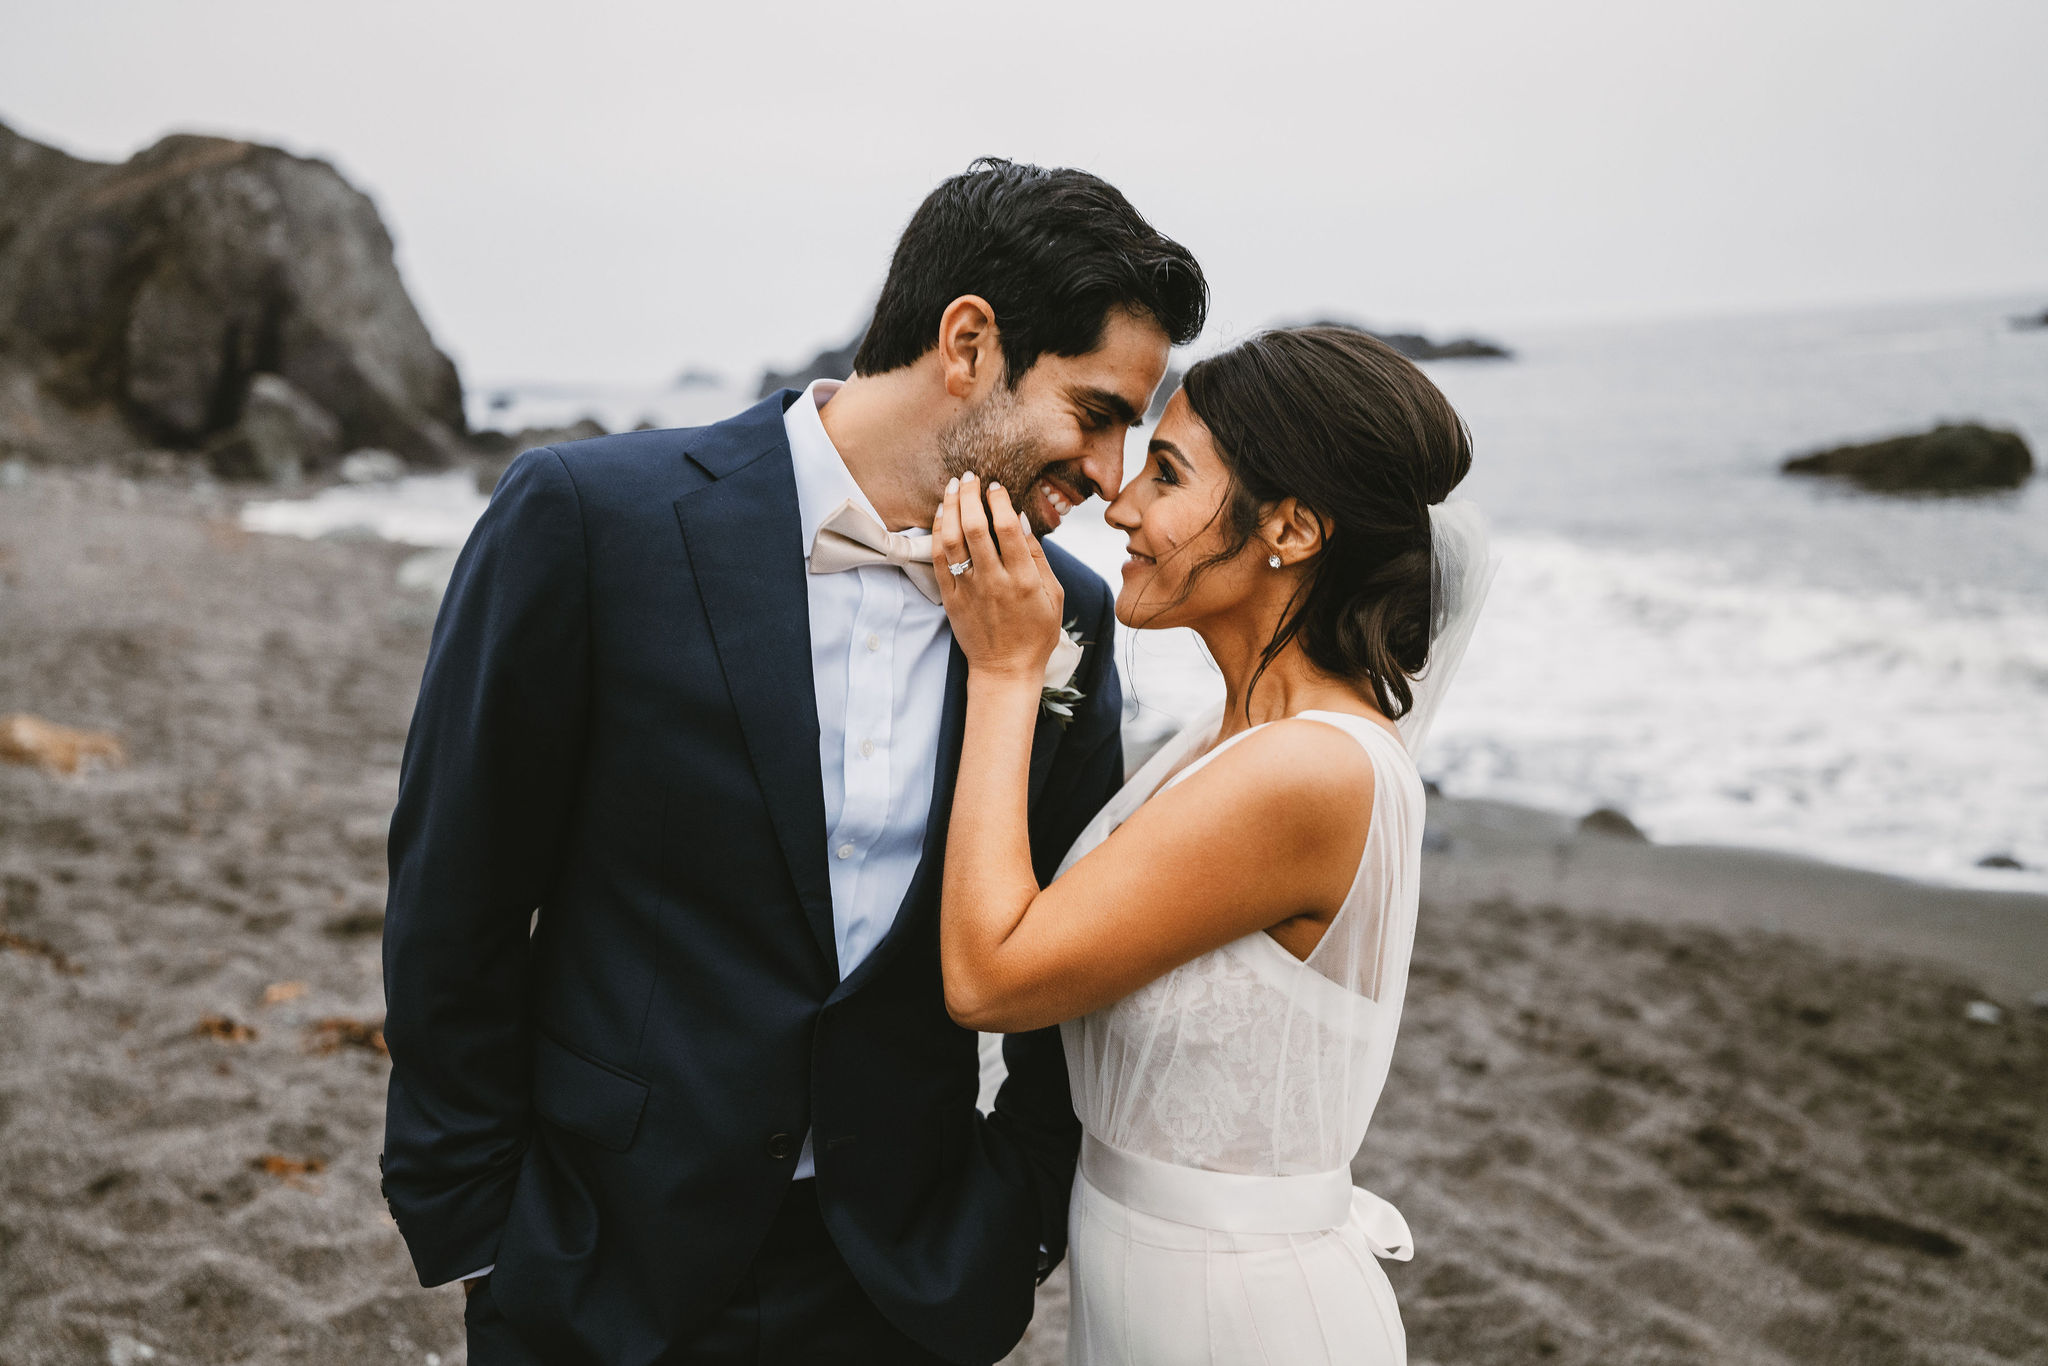 bride and groom share a love glance on the beach during a coastal elopement